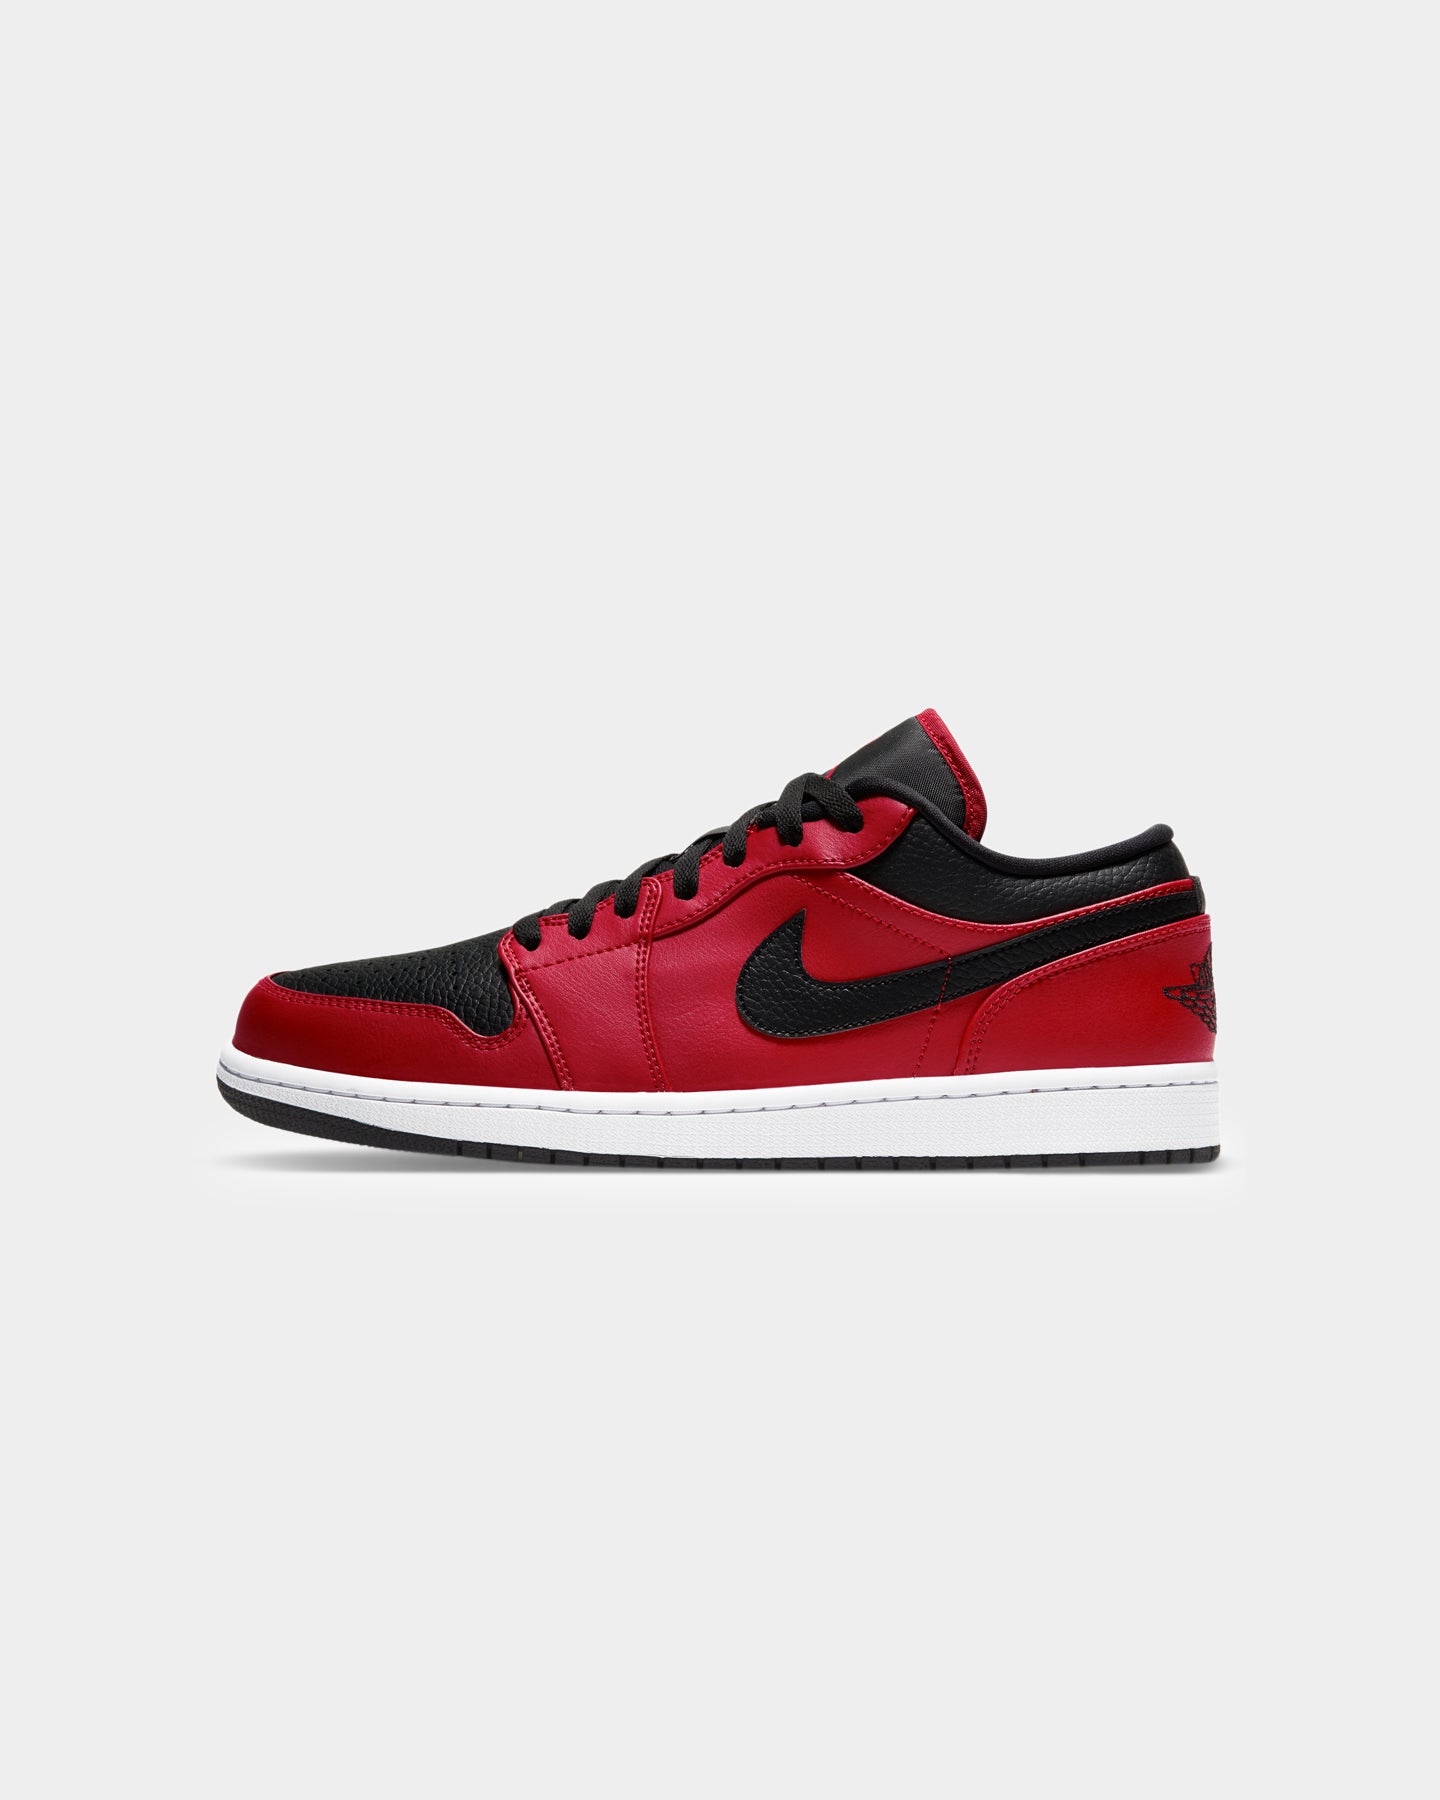 jordan 1 low red and white